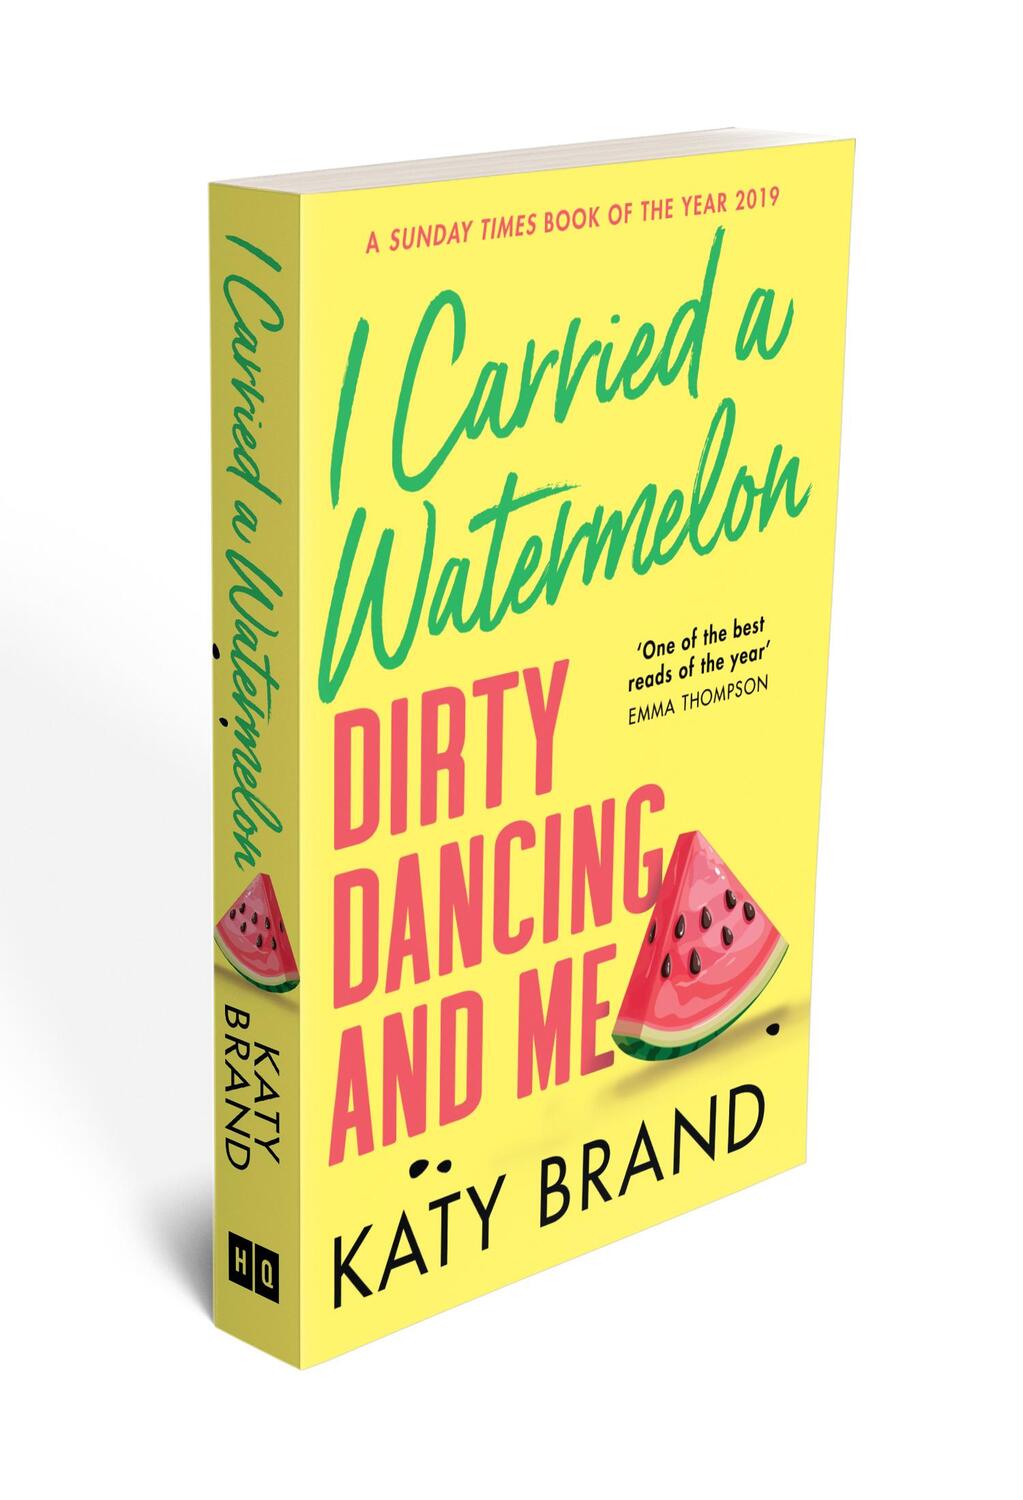 Bild: 9780008352820 | I Carried a Watermelon | Dirty Dancing and Me | Katy Brand | Buch